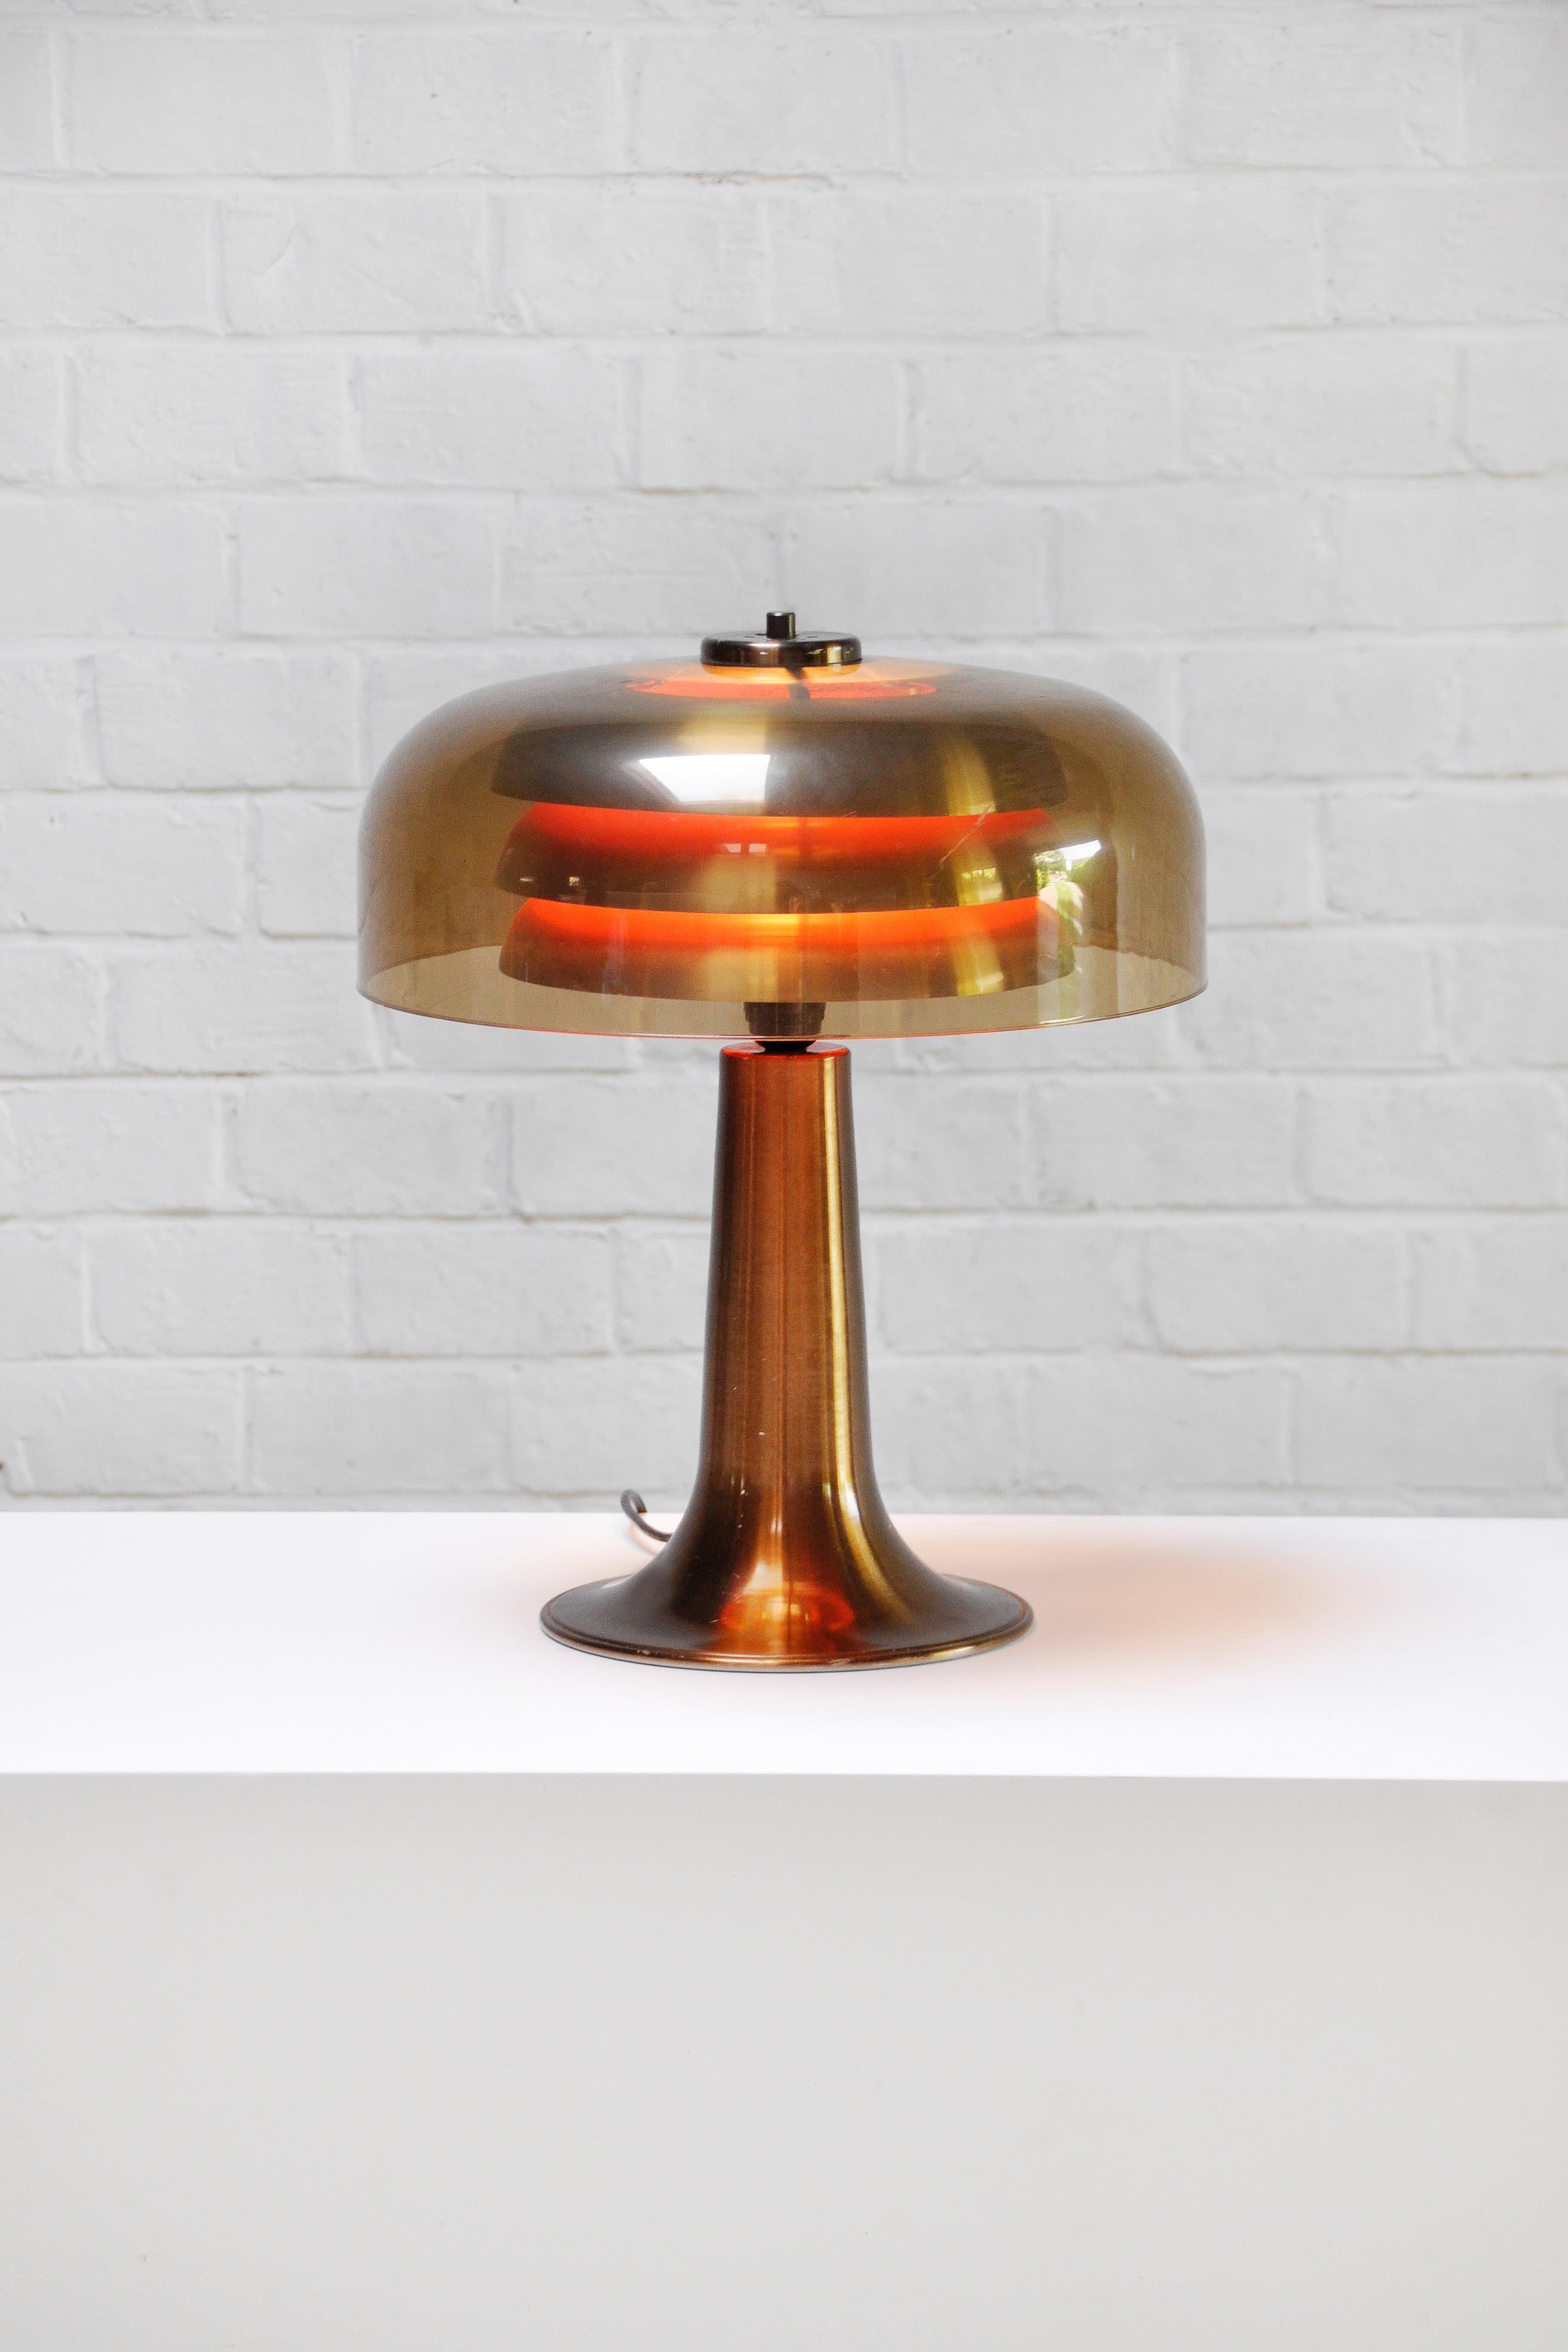 A beautiful and very decorative table lamp made of bronzed aluminium with an acrylic shade. This lamp is unsigned but due to the similarity to BN25 model lamps, this model is attributable to Swedish designer Hans-Agne Jakobsson. Unique to this